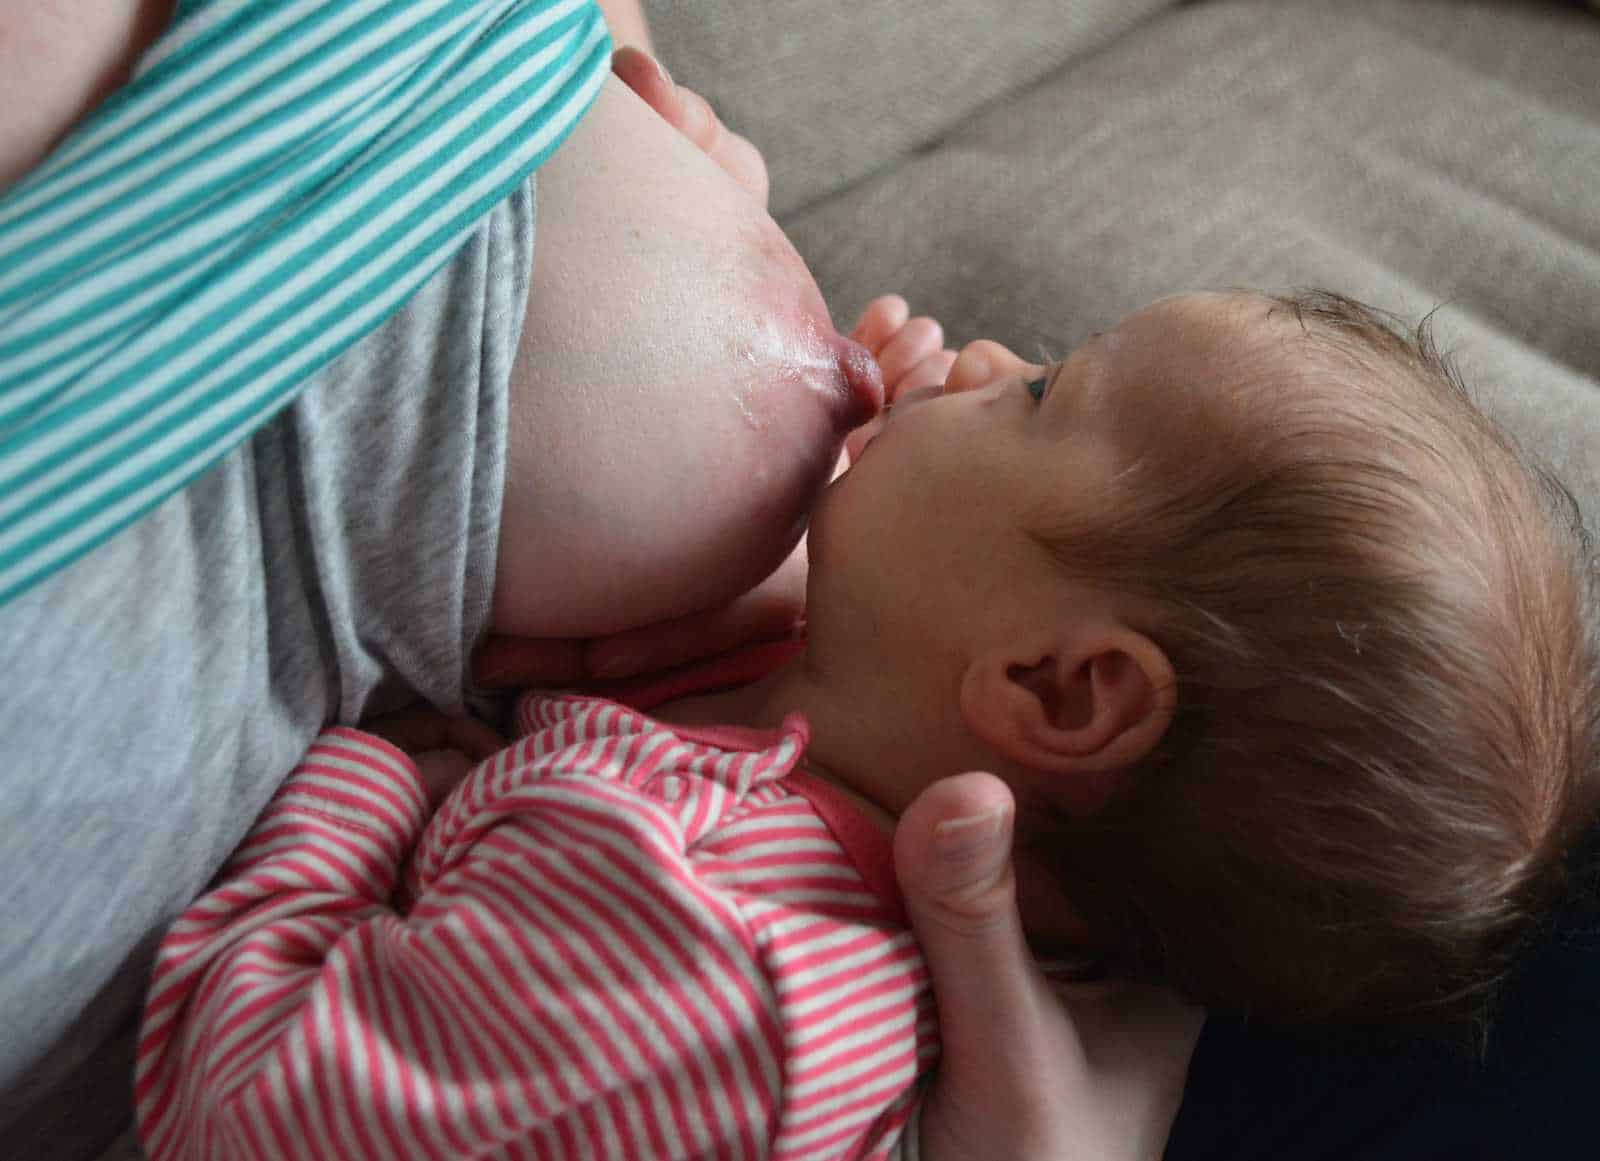 Do I Need To Pump at Night if Baby is Sleeping?